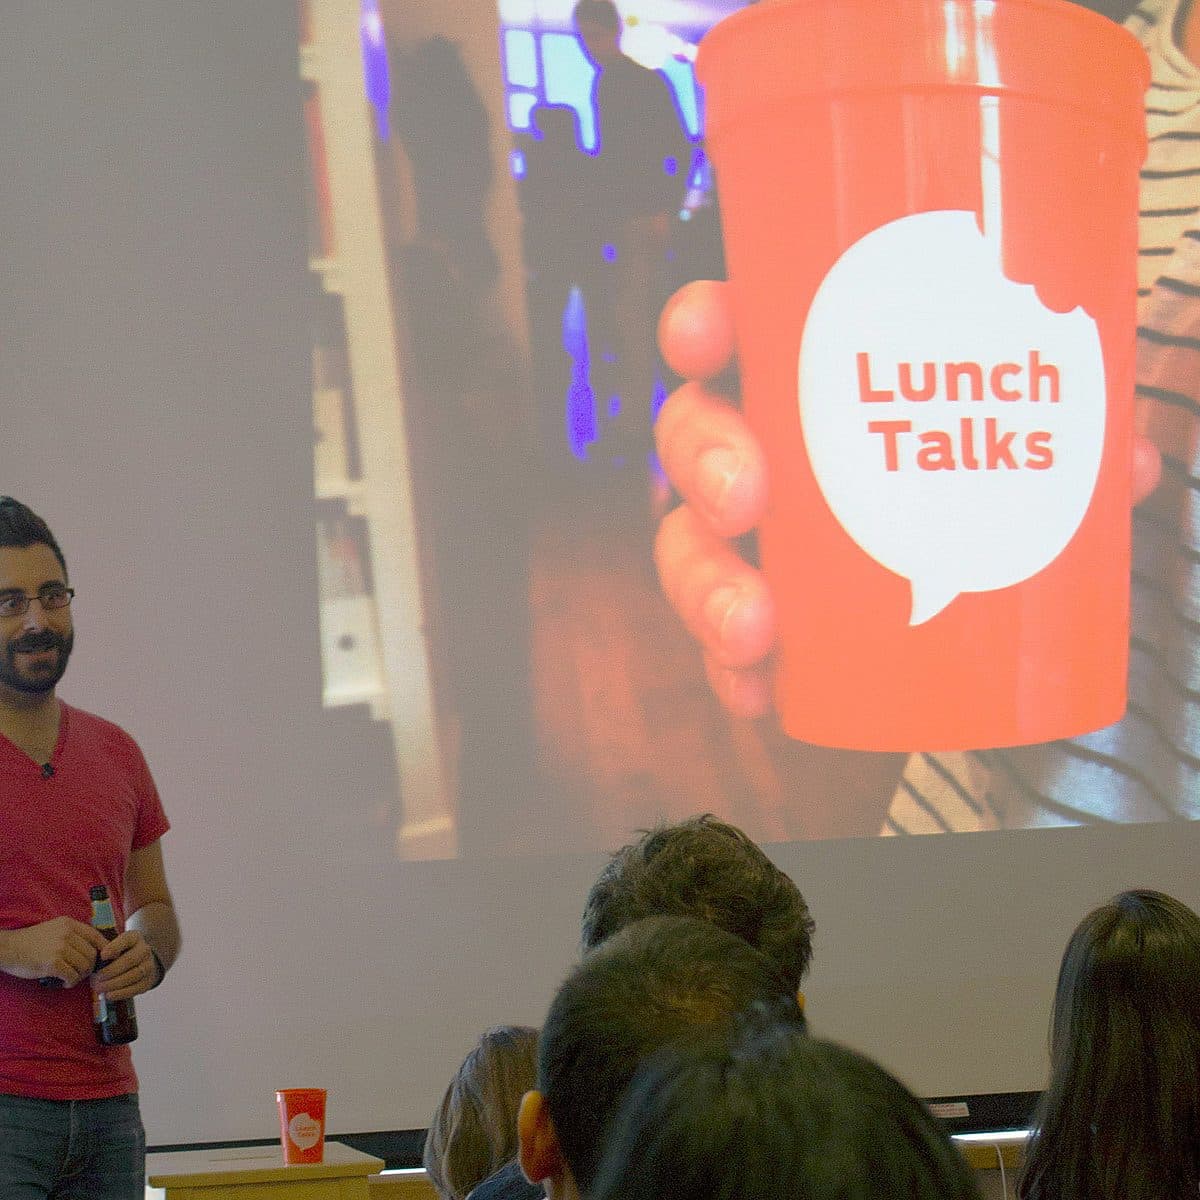 A speaker in a red shirt is holding a drink and presenting in front of an audience. Behind the speaker, a large projection displays a close-up of a red cup with the words "Lunch Talks" on it. Several people in the audience are watching attentively.